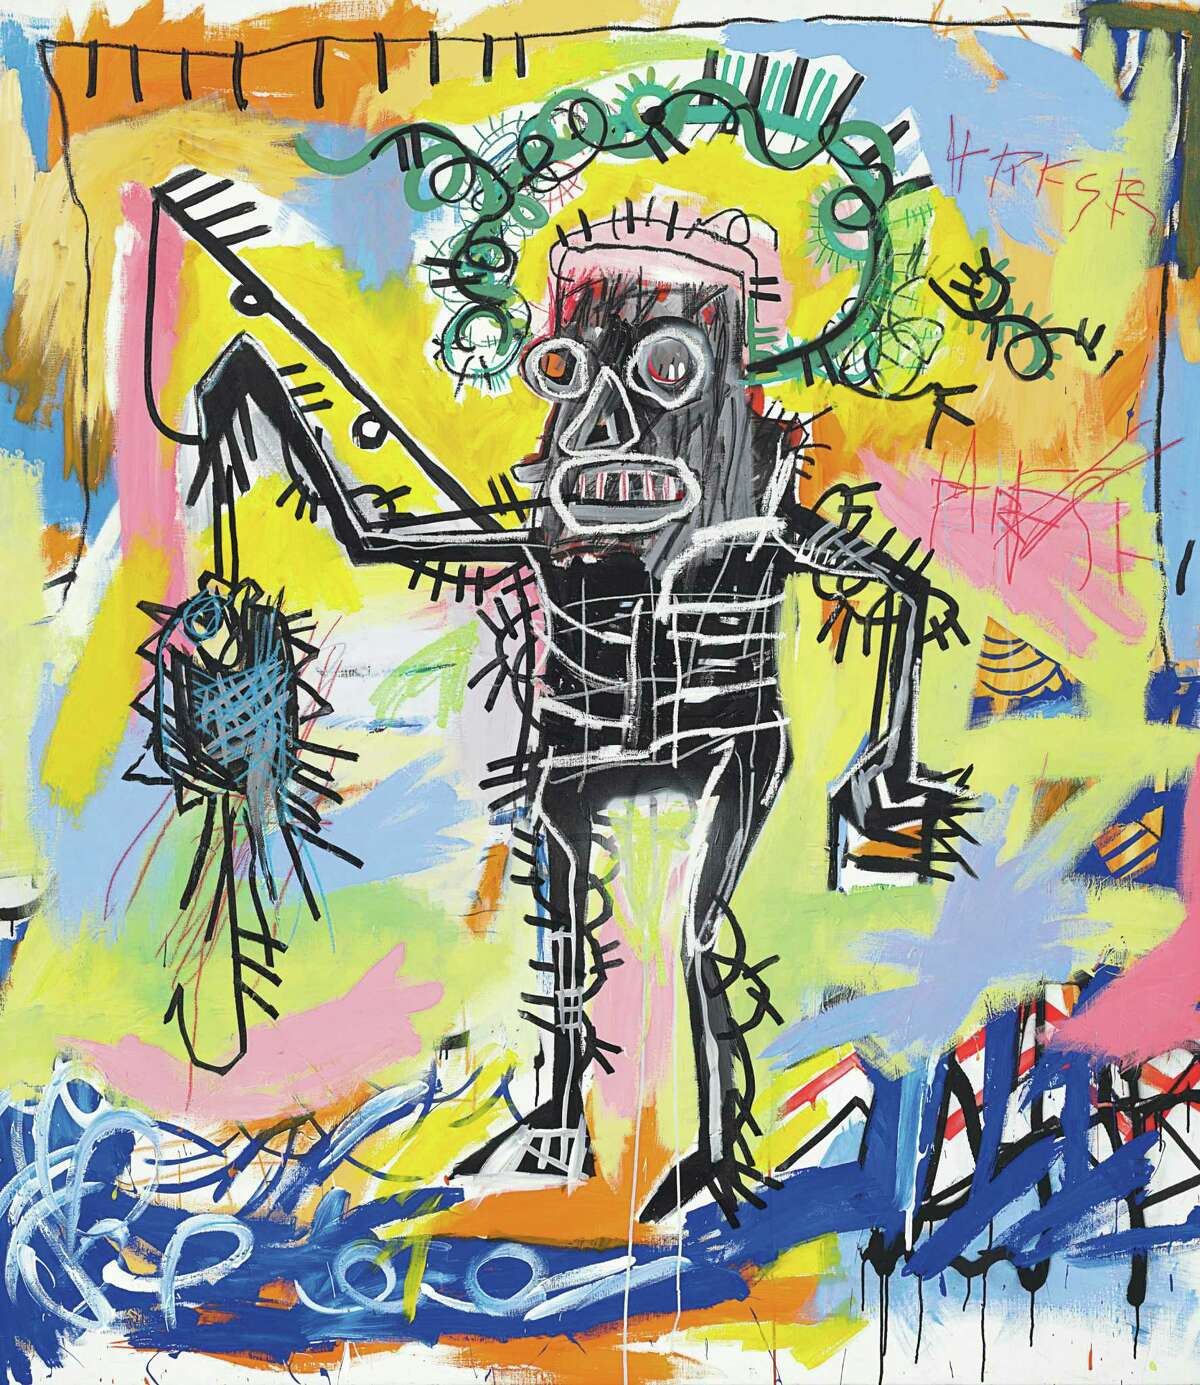 This undated photo provided by Christie's shows Jean-Michel Basquiat's "Untitled 1981". Christie's auction house says the colorful acrylic and oilstick canvas could set a new record for the graffiti artist when it's offered in the fall. The current record is $20.1 million. "Untitled 1981" is an important early work by the artist, who died at age 27. It goes on sale Nov. 14. (AP Photo/Christie's)